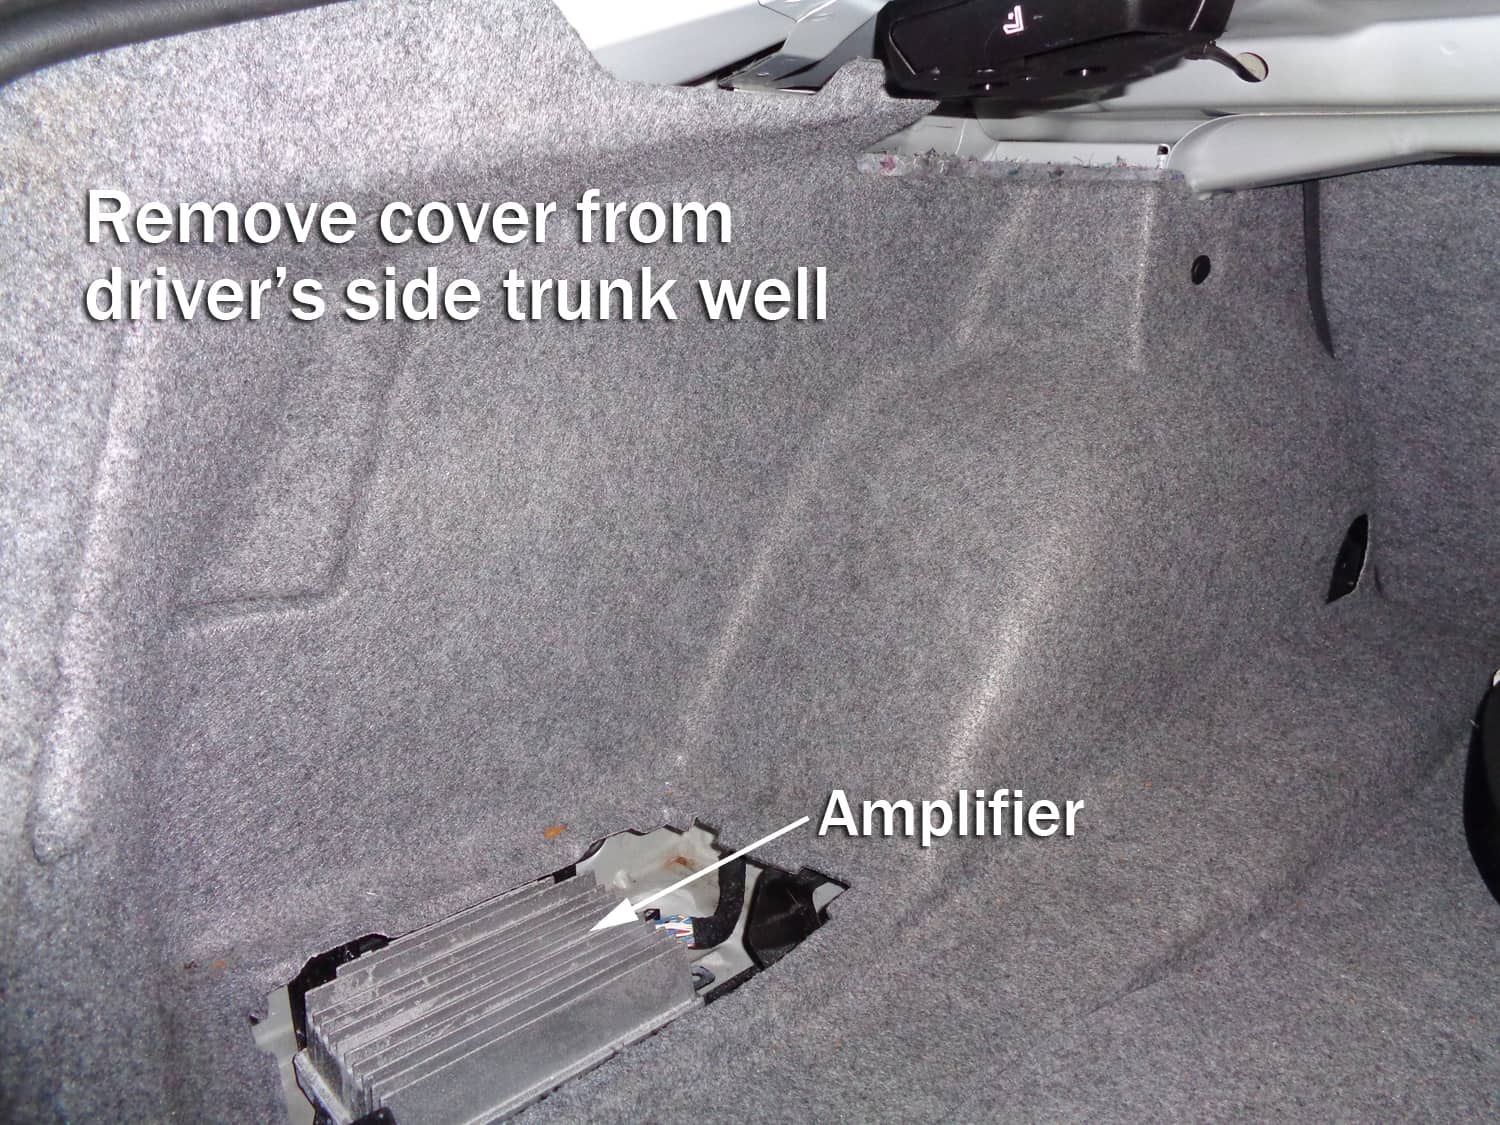 BMW E90 Trunk Leak - remove left trunk well cover